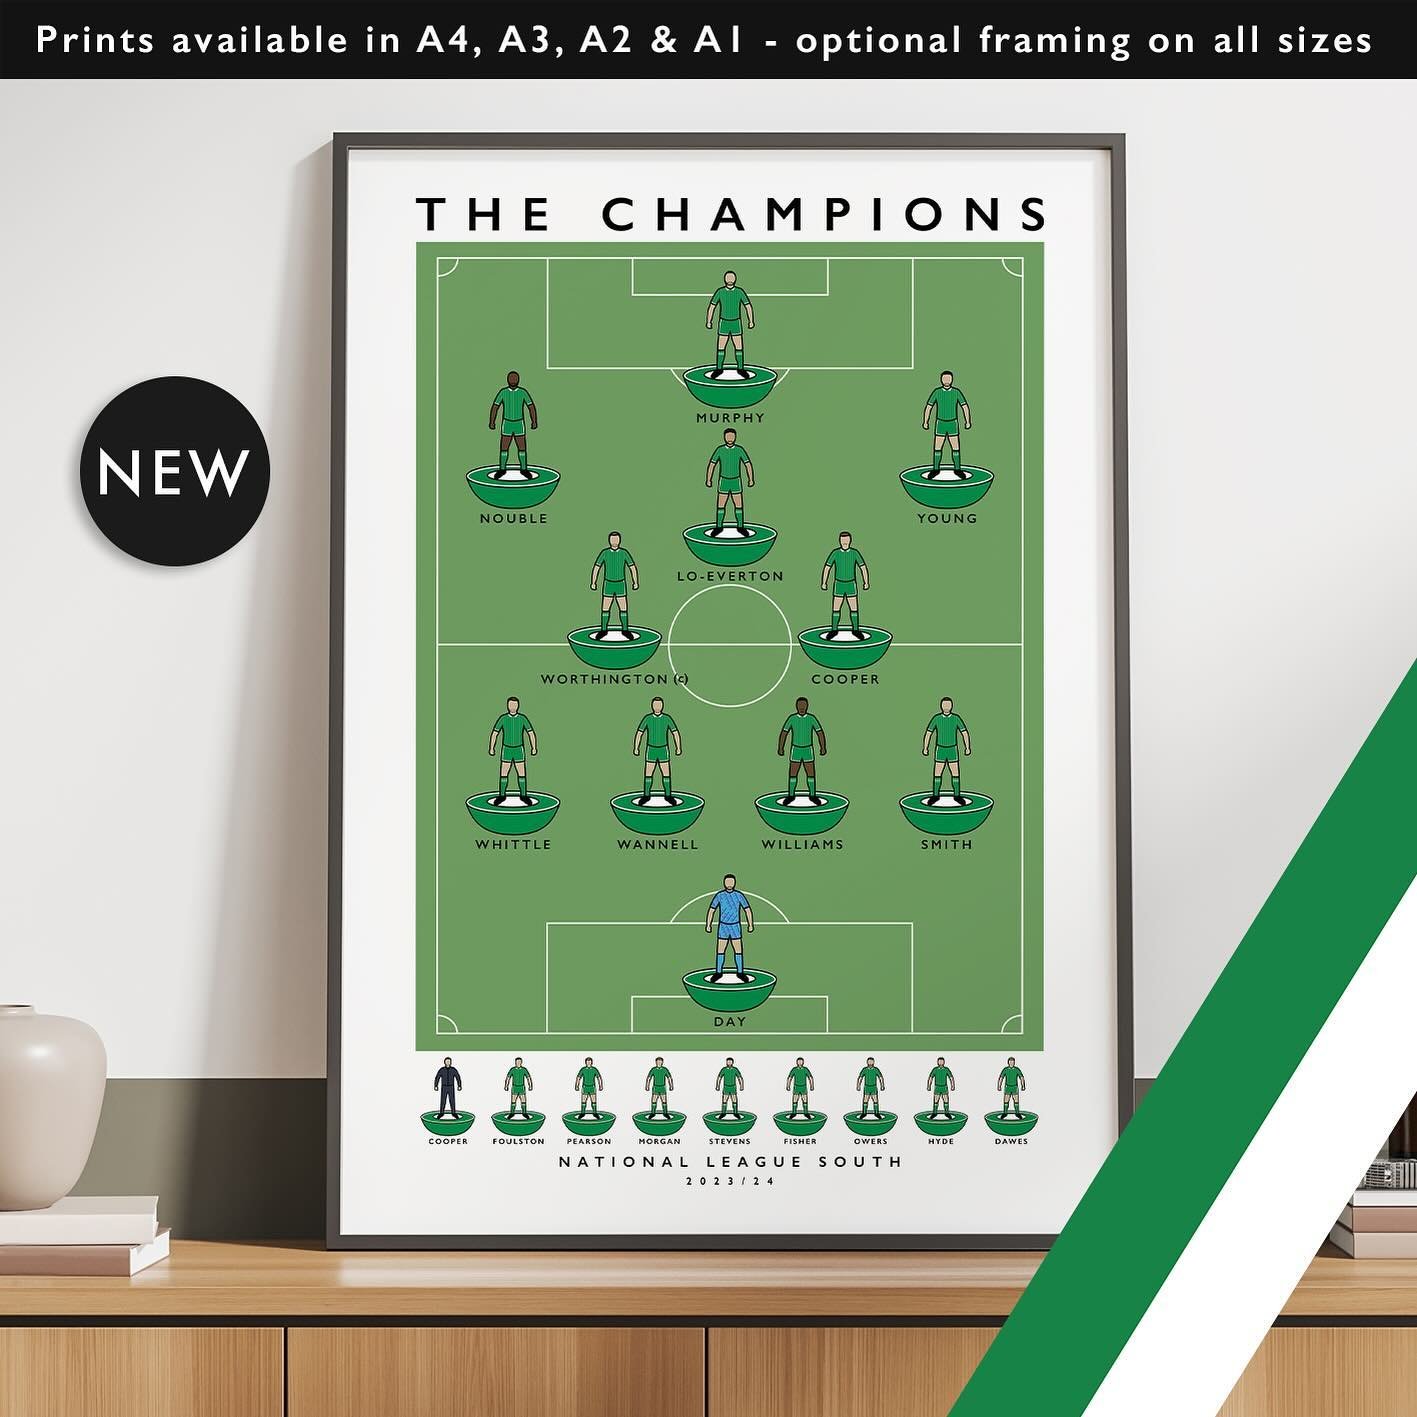 NEW: Yeovil Town The Champions 23/24

Prints available in A4, A3, A2 &amp; A1 with optional framing 

Get 10% off until midnight with the discount code
THE-GLOVERS 

Shop now: matthewjiwood.com/subbuteo-teams&hellip;

#Yeovil #YTFC #Glovers